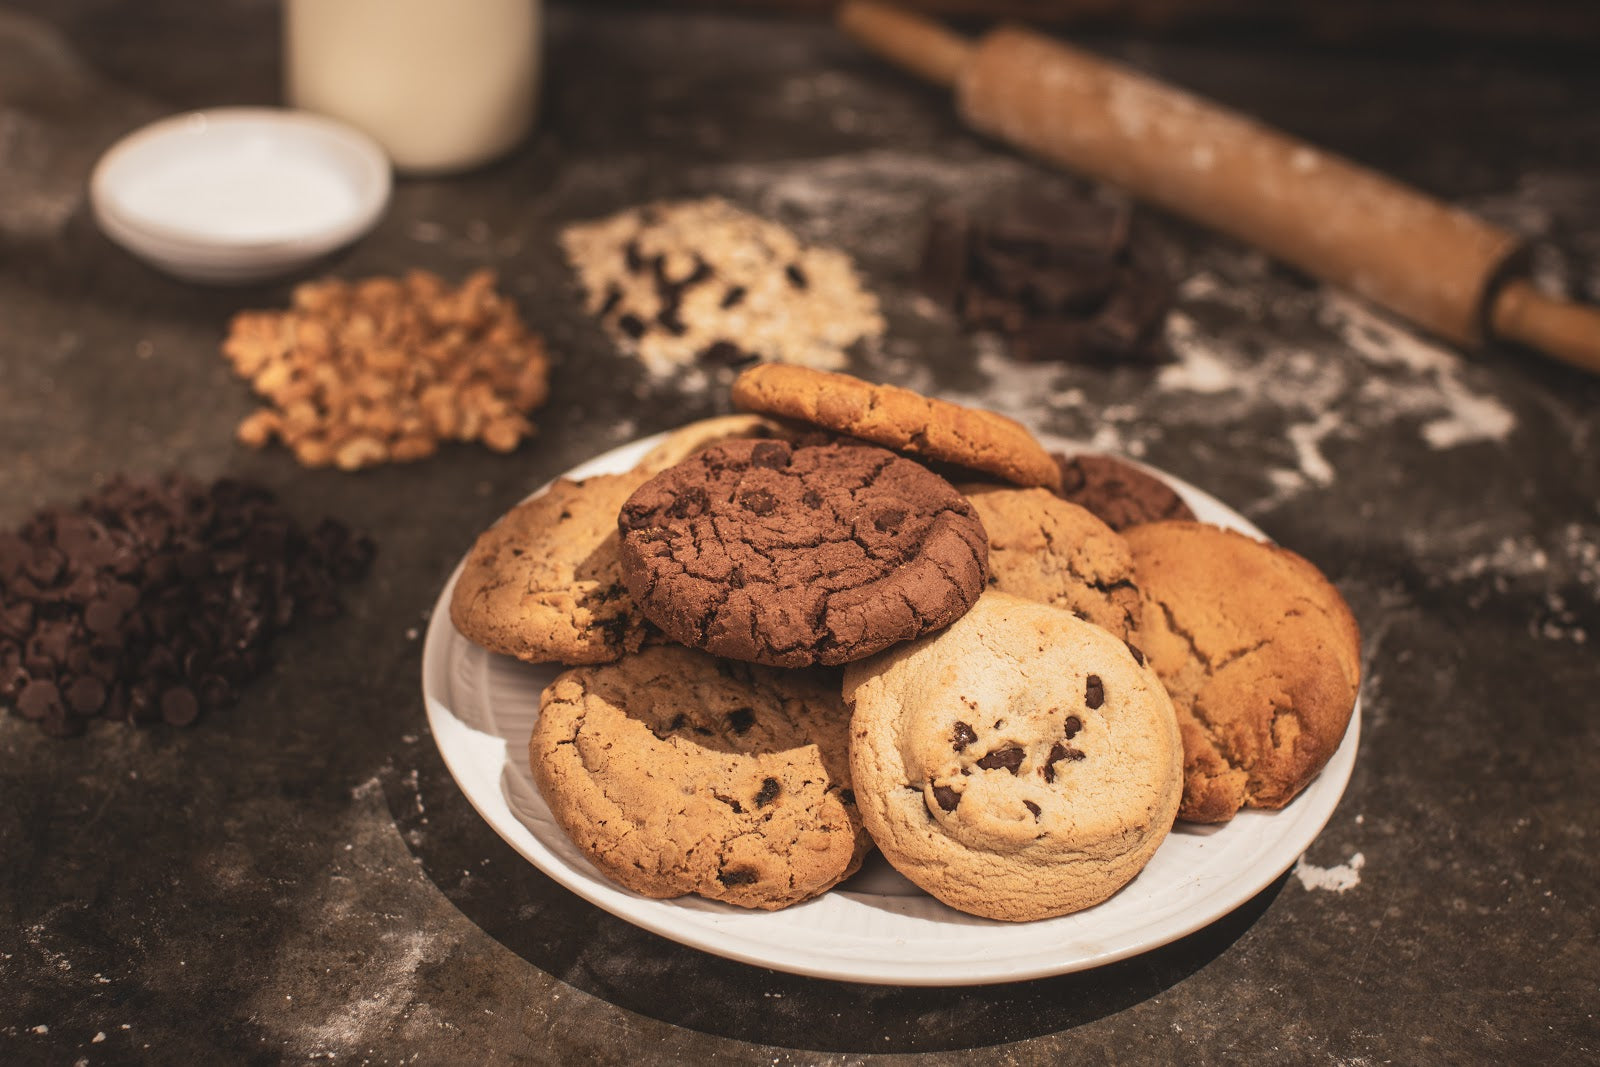 Classic Assorted Cookie Flavors That Everyone Loves